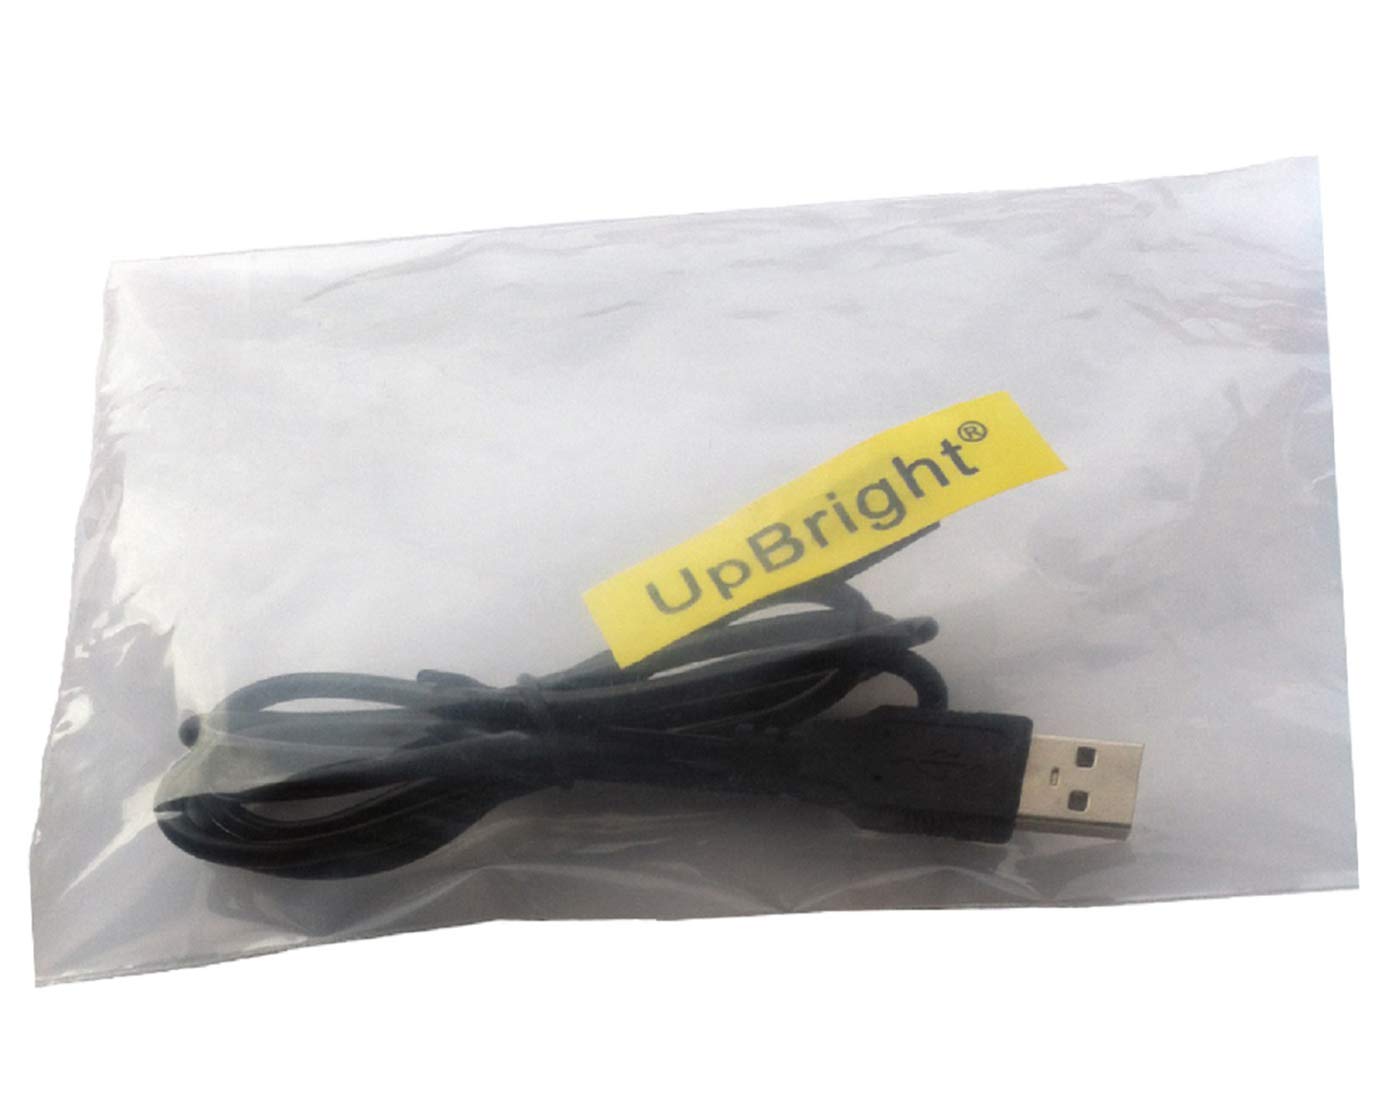 UpBright USB Charging Cable Power Charger Cord Compatible with iGPSPORT GPS Cycling Computer ANT+ Bike Bicycle Speed Meta Series IGS10S IGS20E IGS60S IGS130S iGS320 IGS520S IGS618 IGS618S IGS620